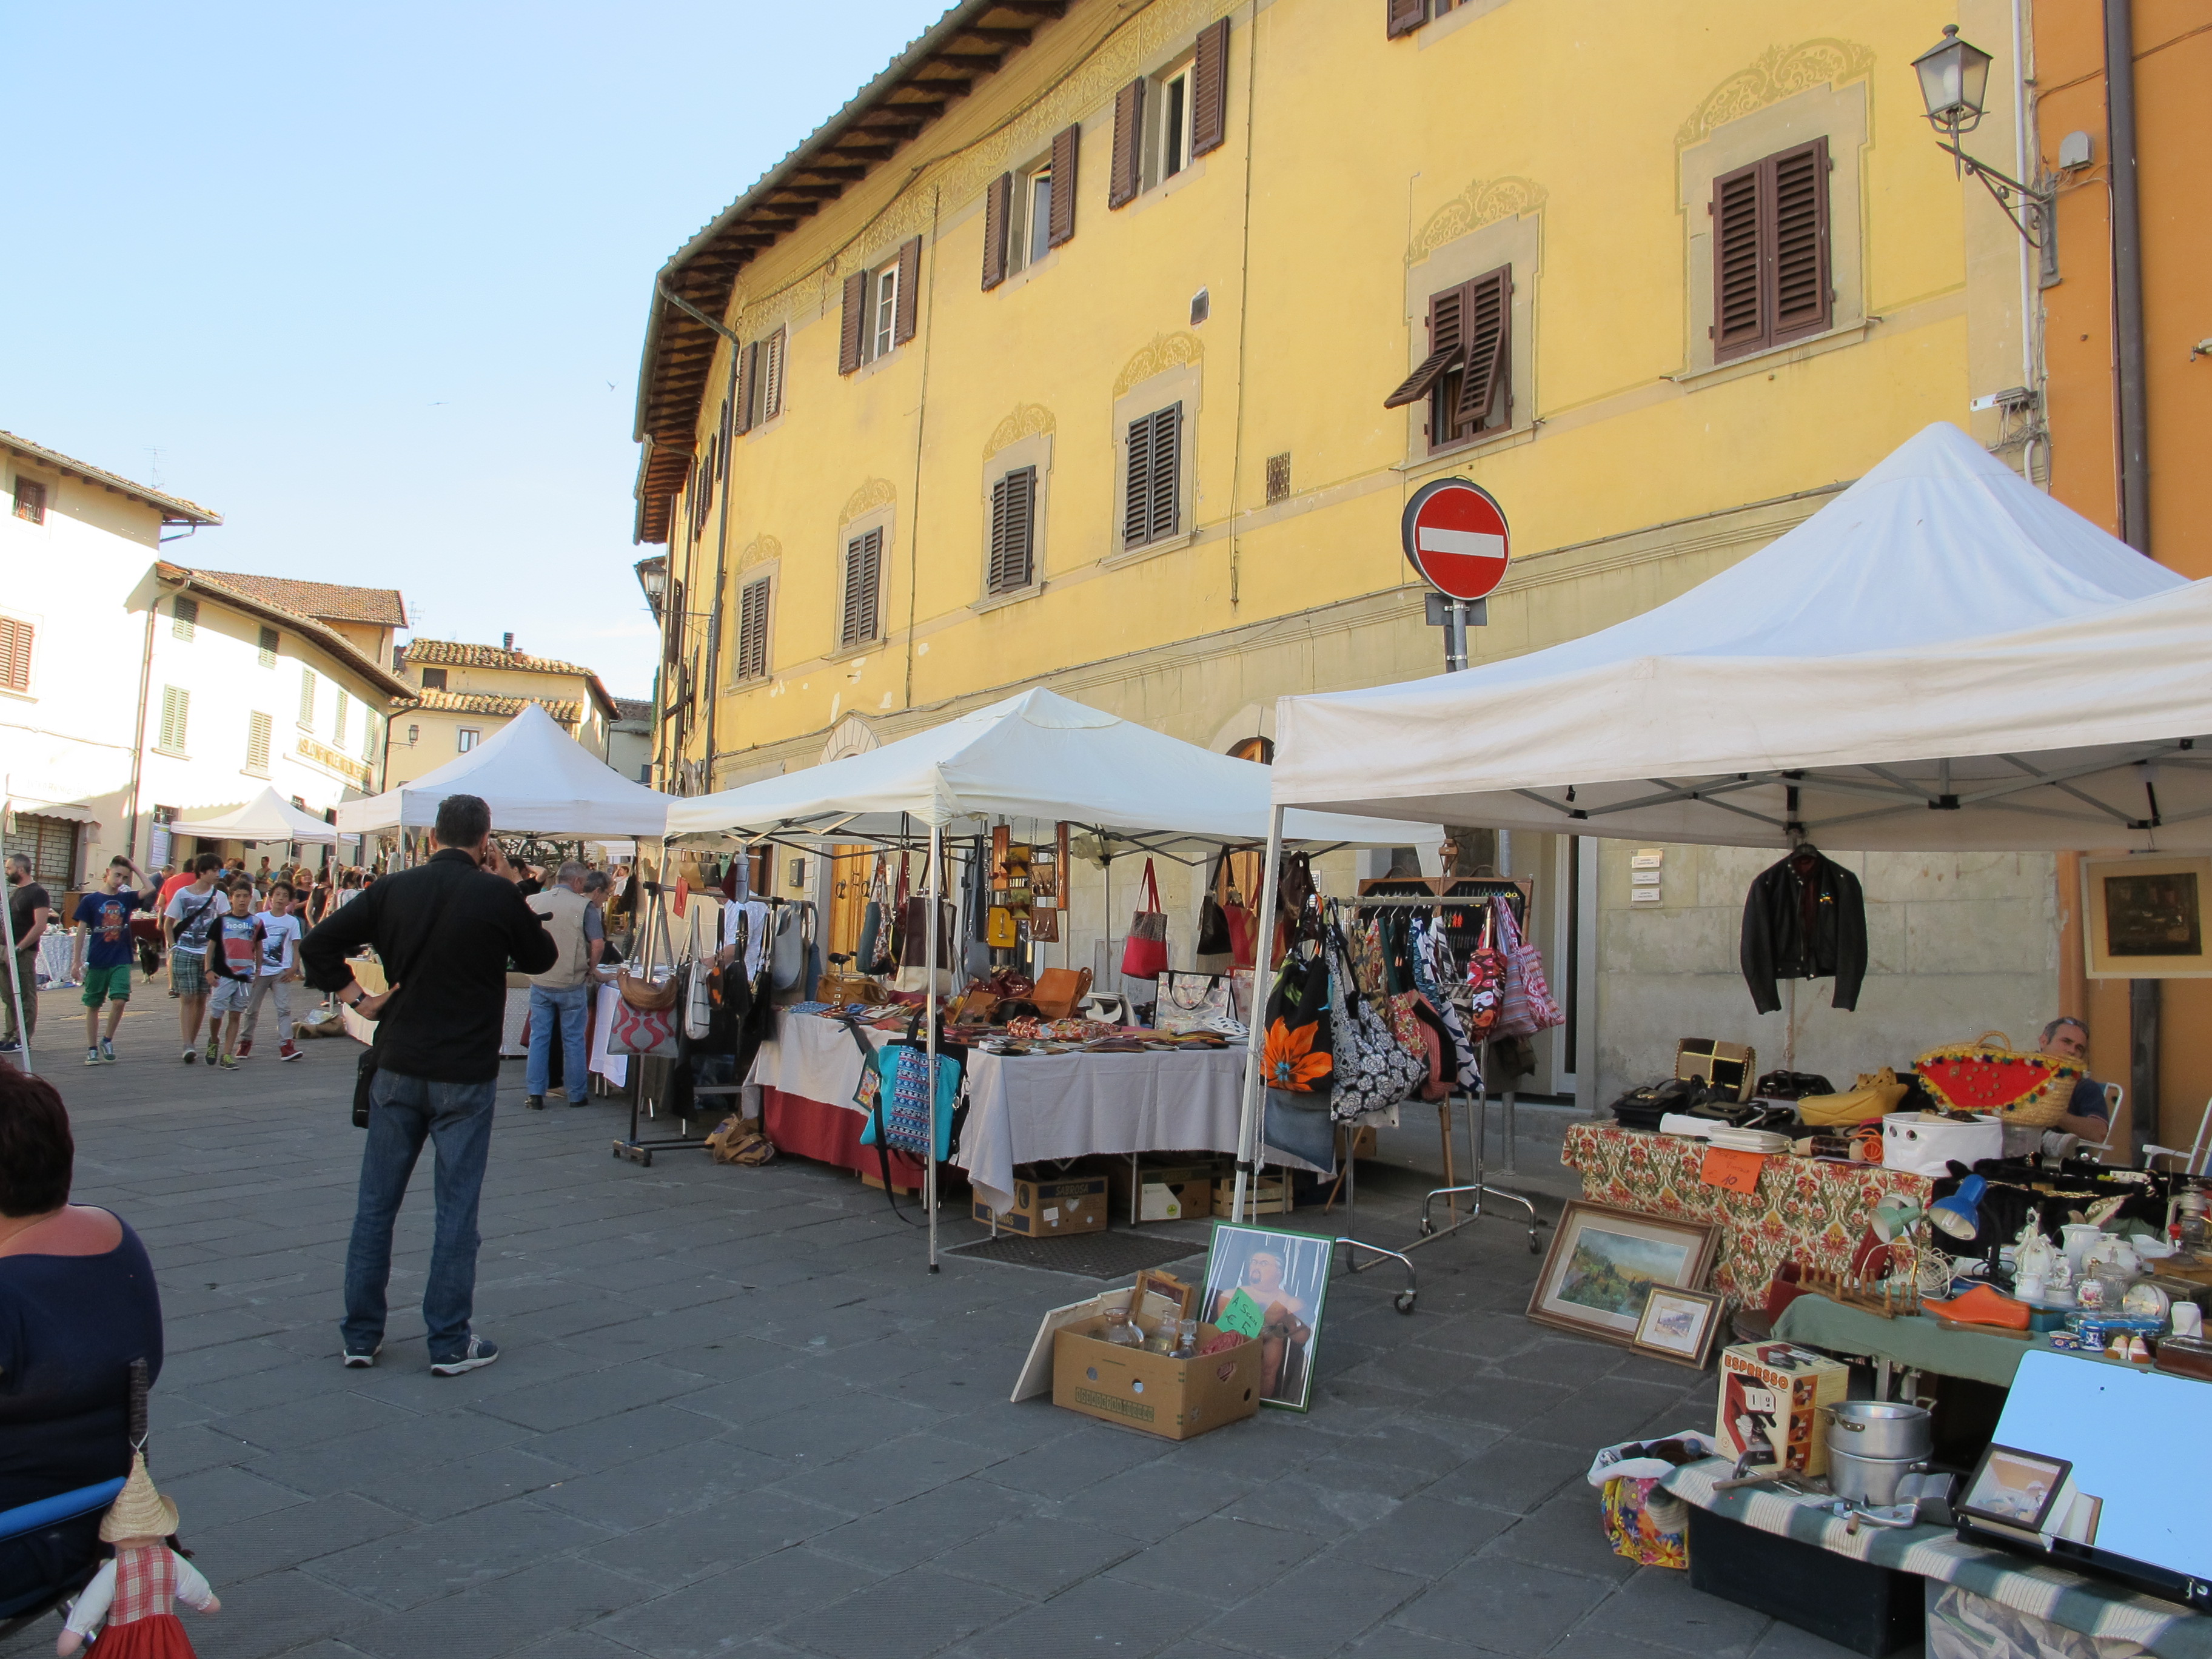 Mercanzie in piazza